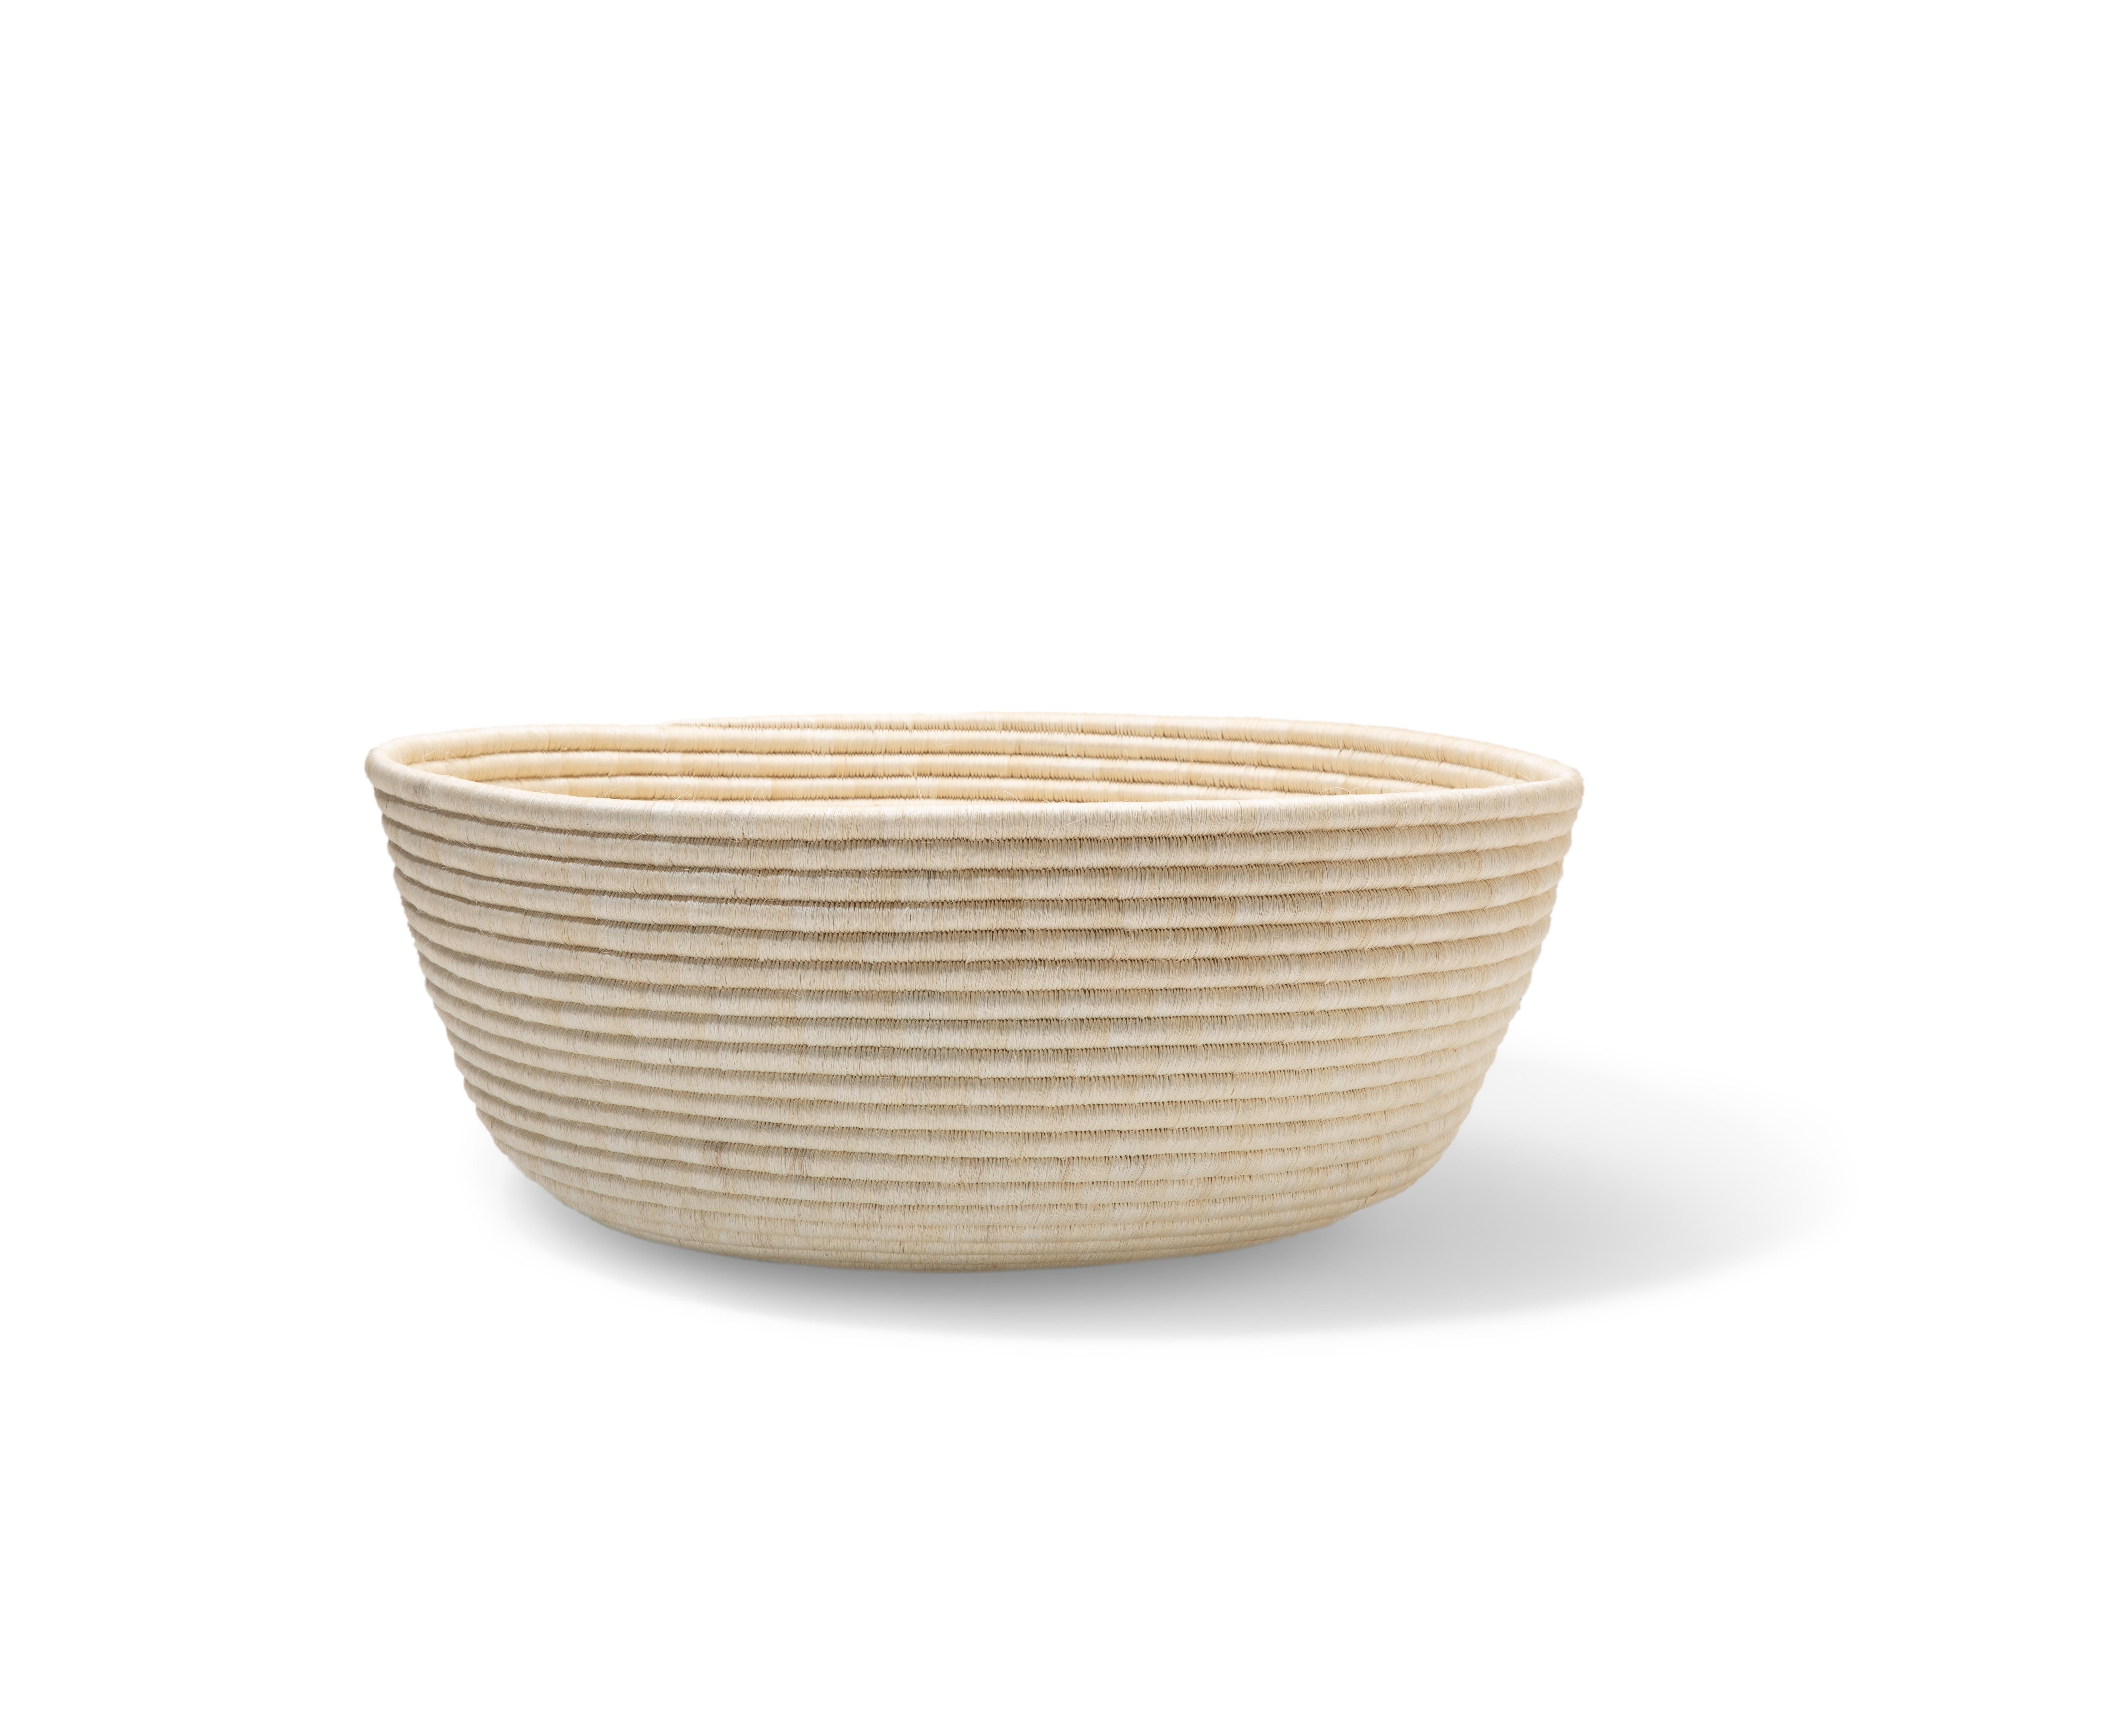 Medium La Che basket by Sebastian Herkner
Materials: 100 % natural fique agave.
Technique: Hand-woven in Colombia. 
Dimensions: Diameter 58 cm x H 30 cm 
Available in colors: cobre, olive, black, cuerda. And other sizes. 

The La Che basket is